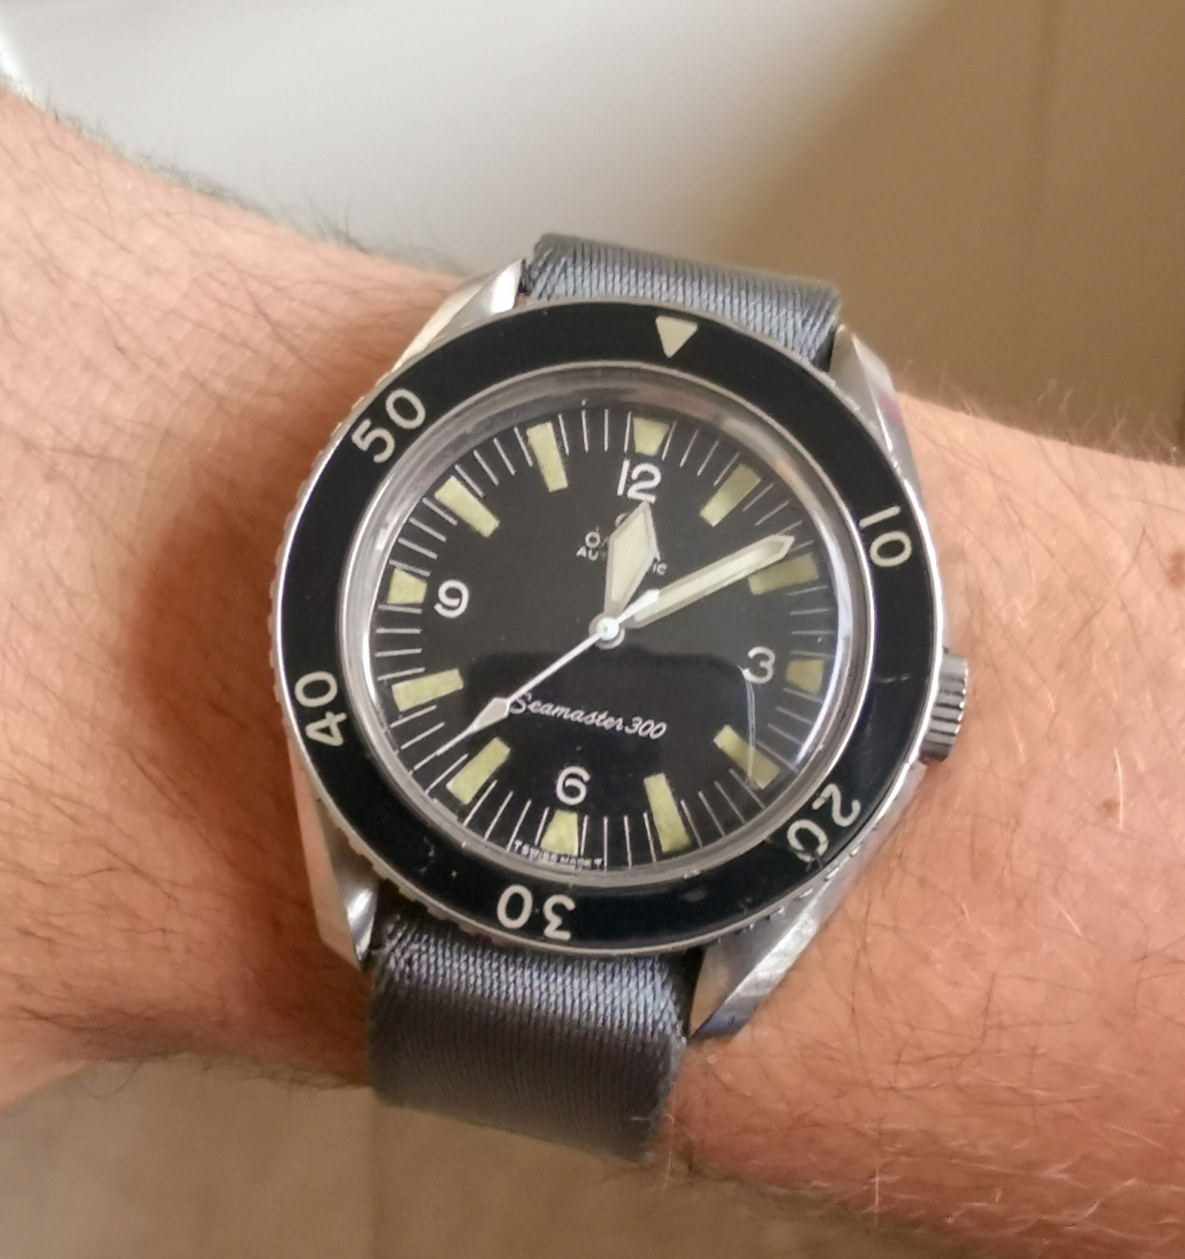 Omega Seamaster 300 for the Canadian 